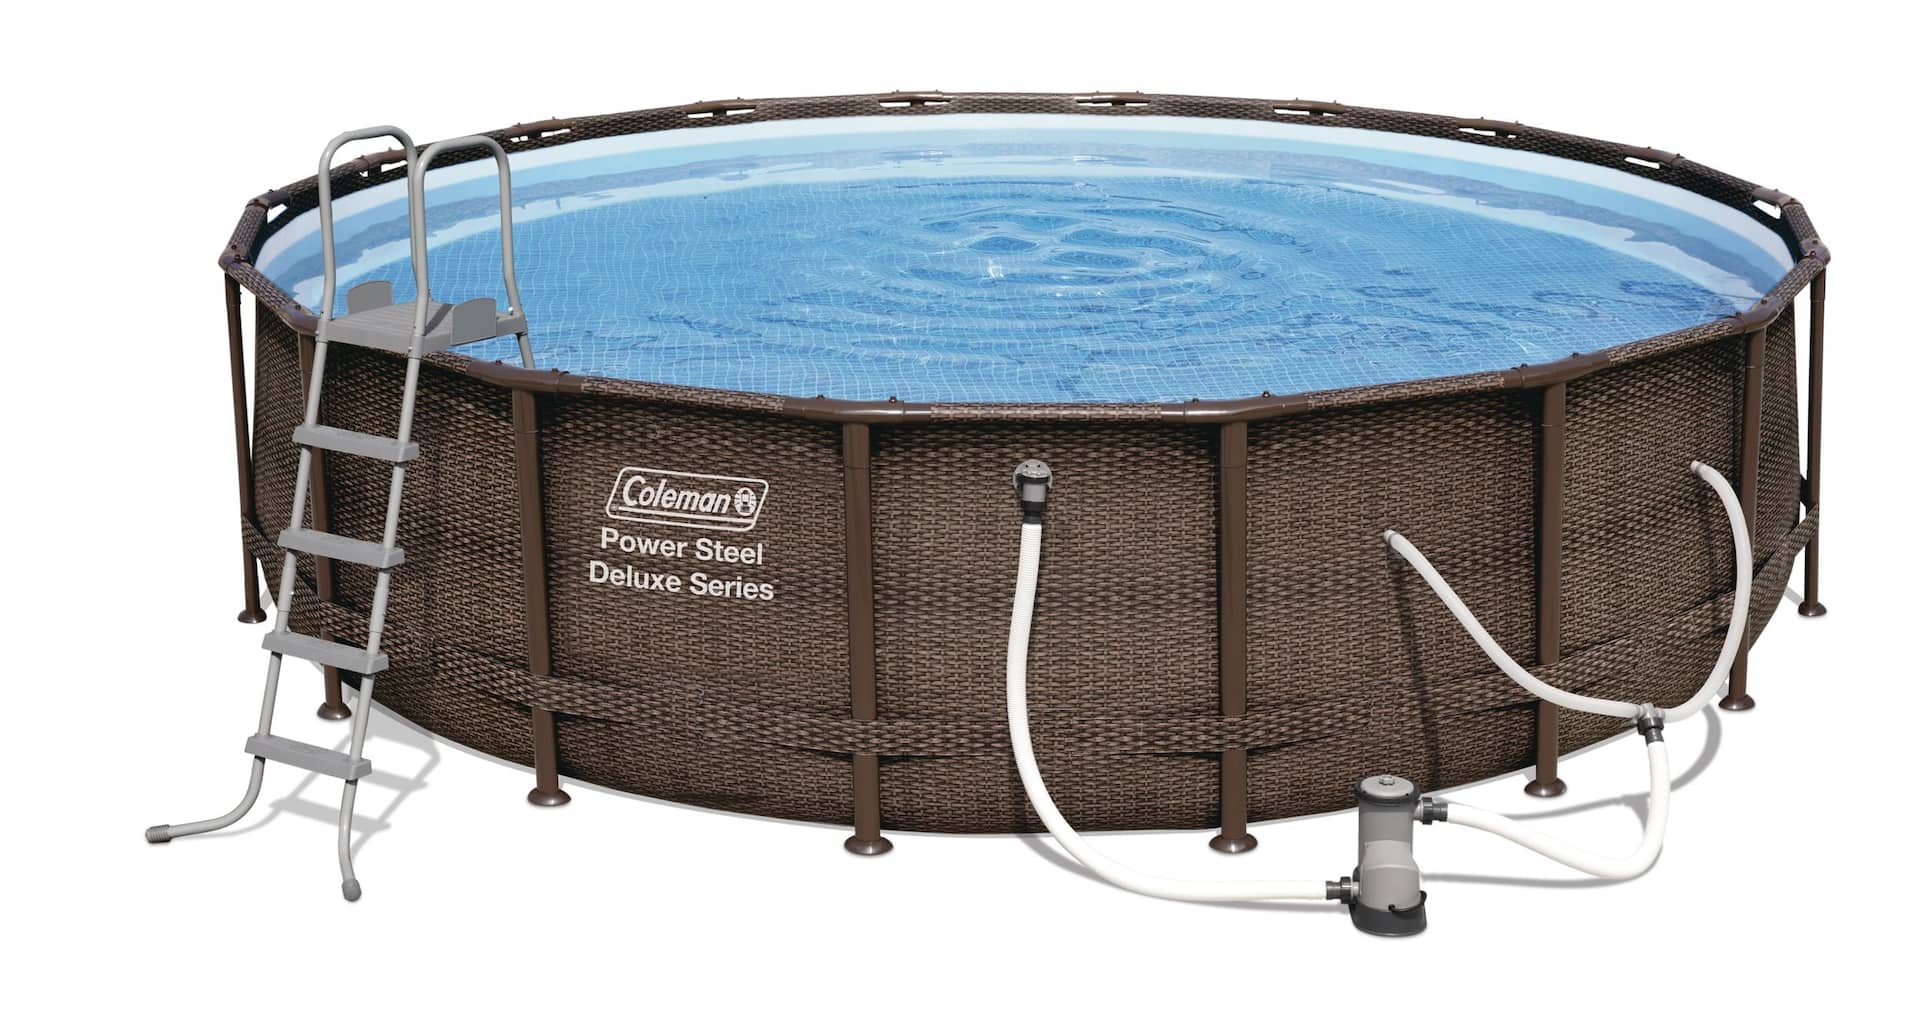 Outbound Round Steel Frame Swimming Pool with Ladder, 16ft x 48-in